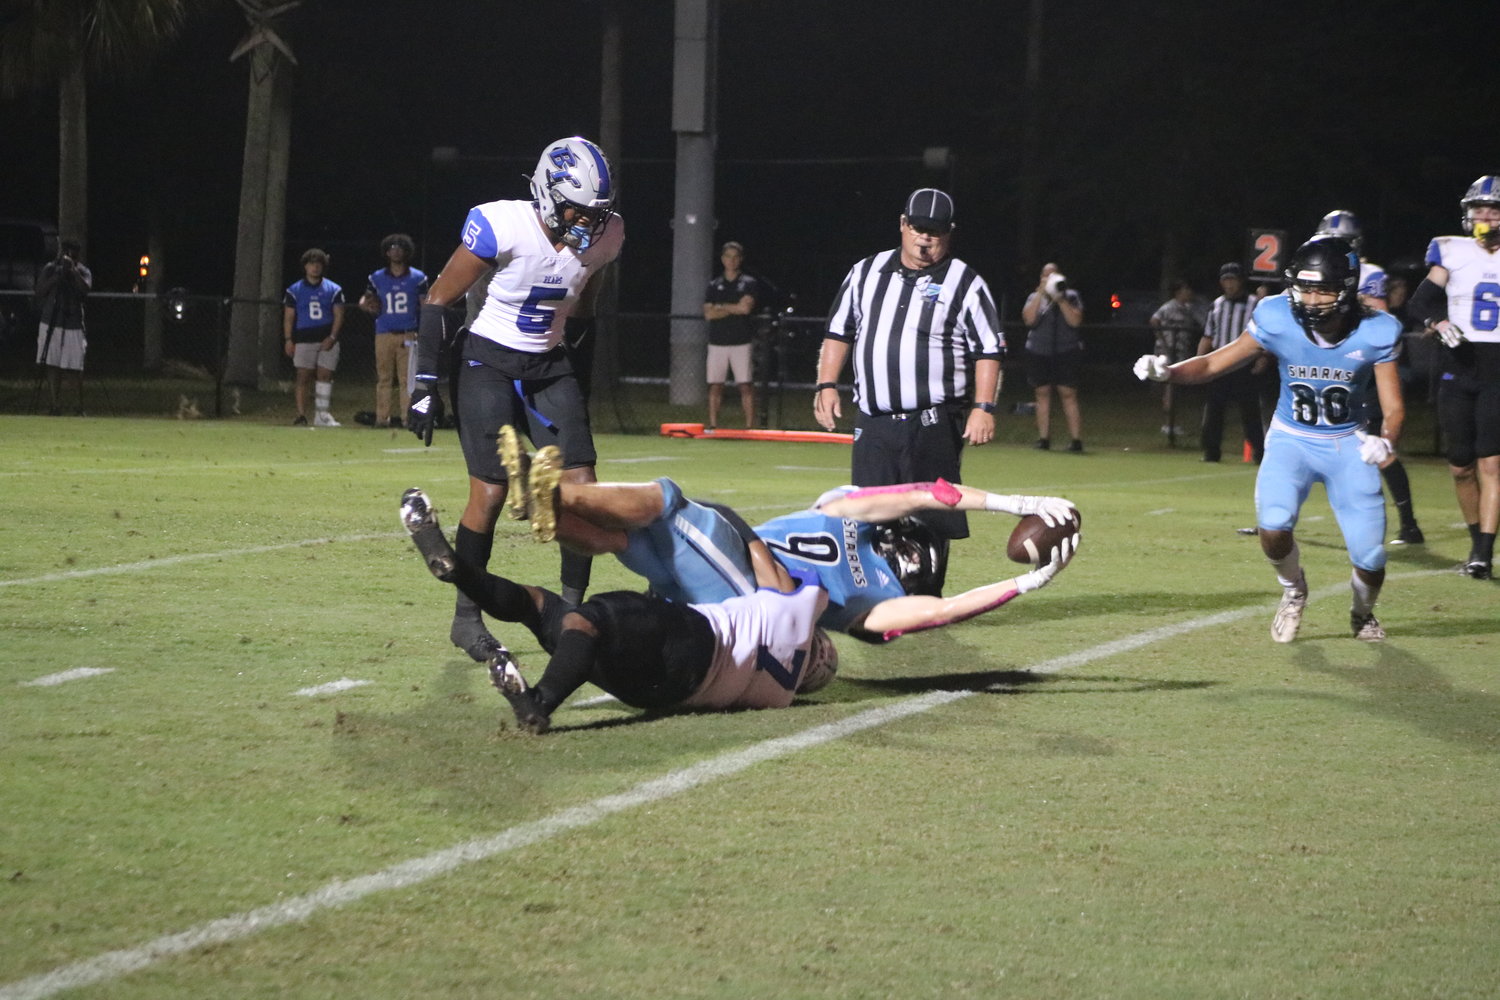 Ponte Vedra’s Luke Pirris reaches across the goal line for one of two receiving touchdowns against Bartram Trail Oct. 8. Consistency is key to sustained success for the Sharks.